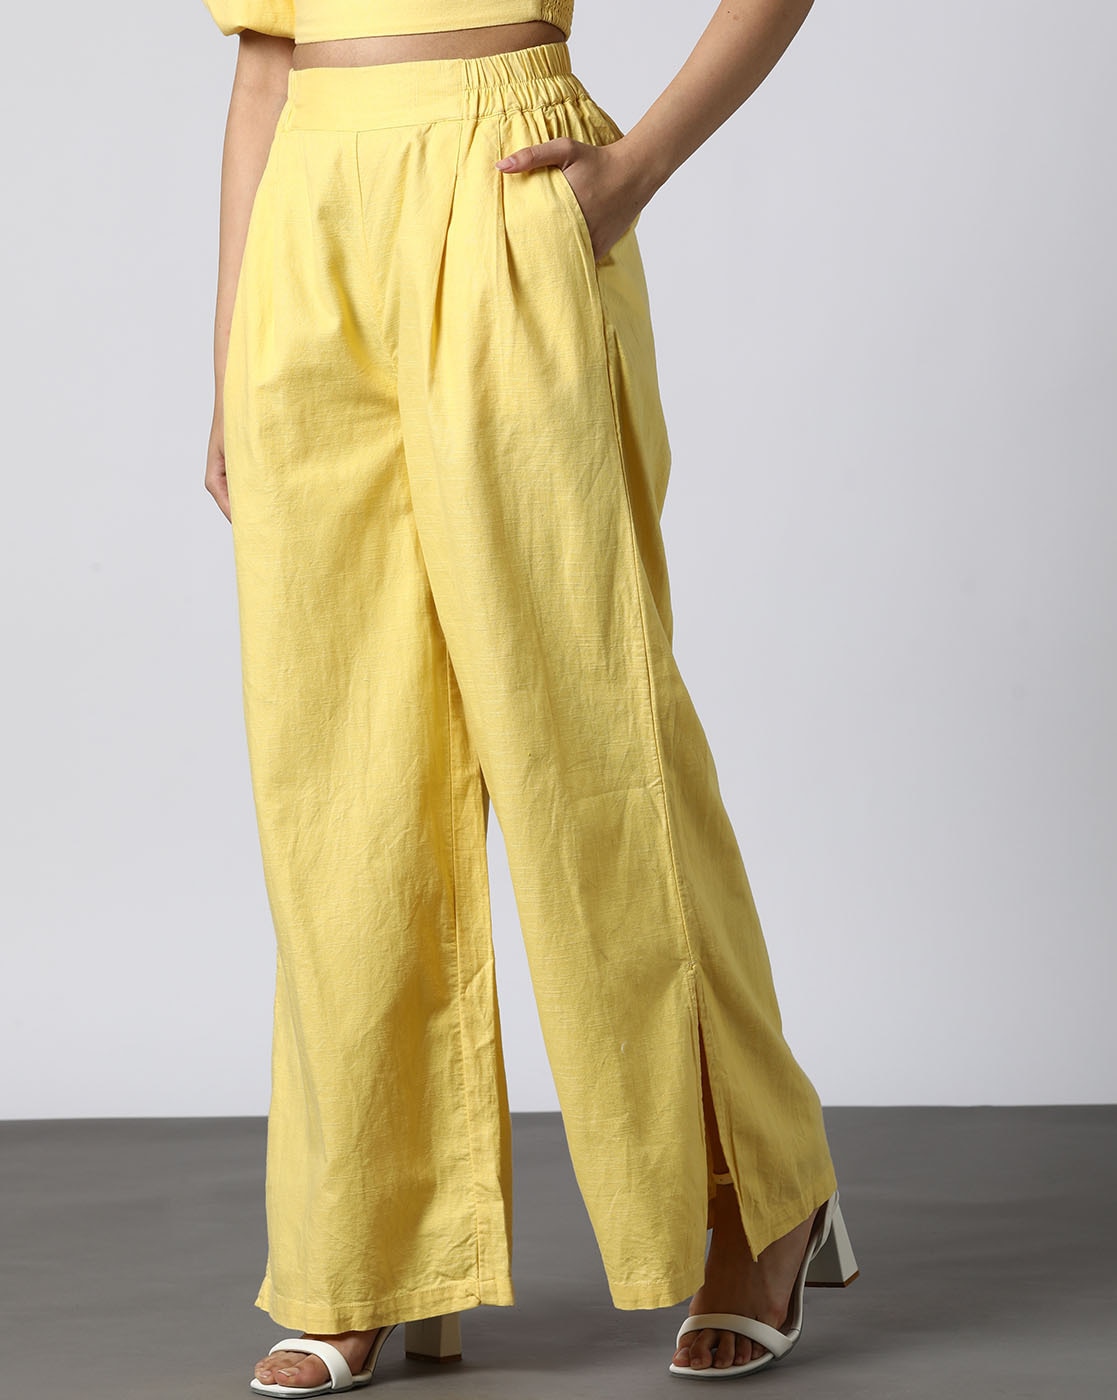 Yellow pant suit | Work outfits women, Casual work outfits, Fashion